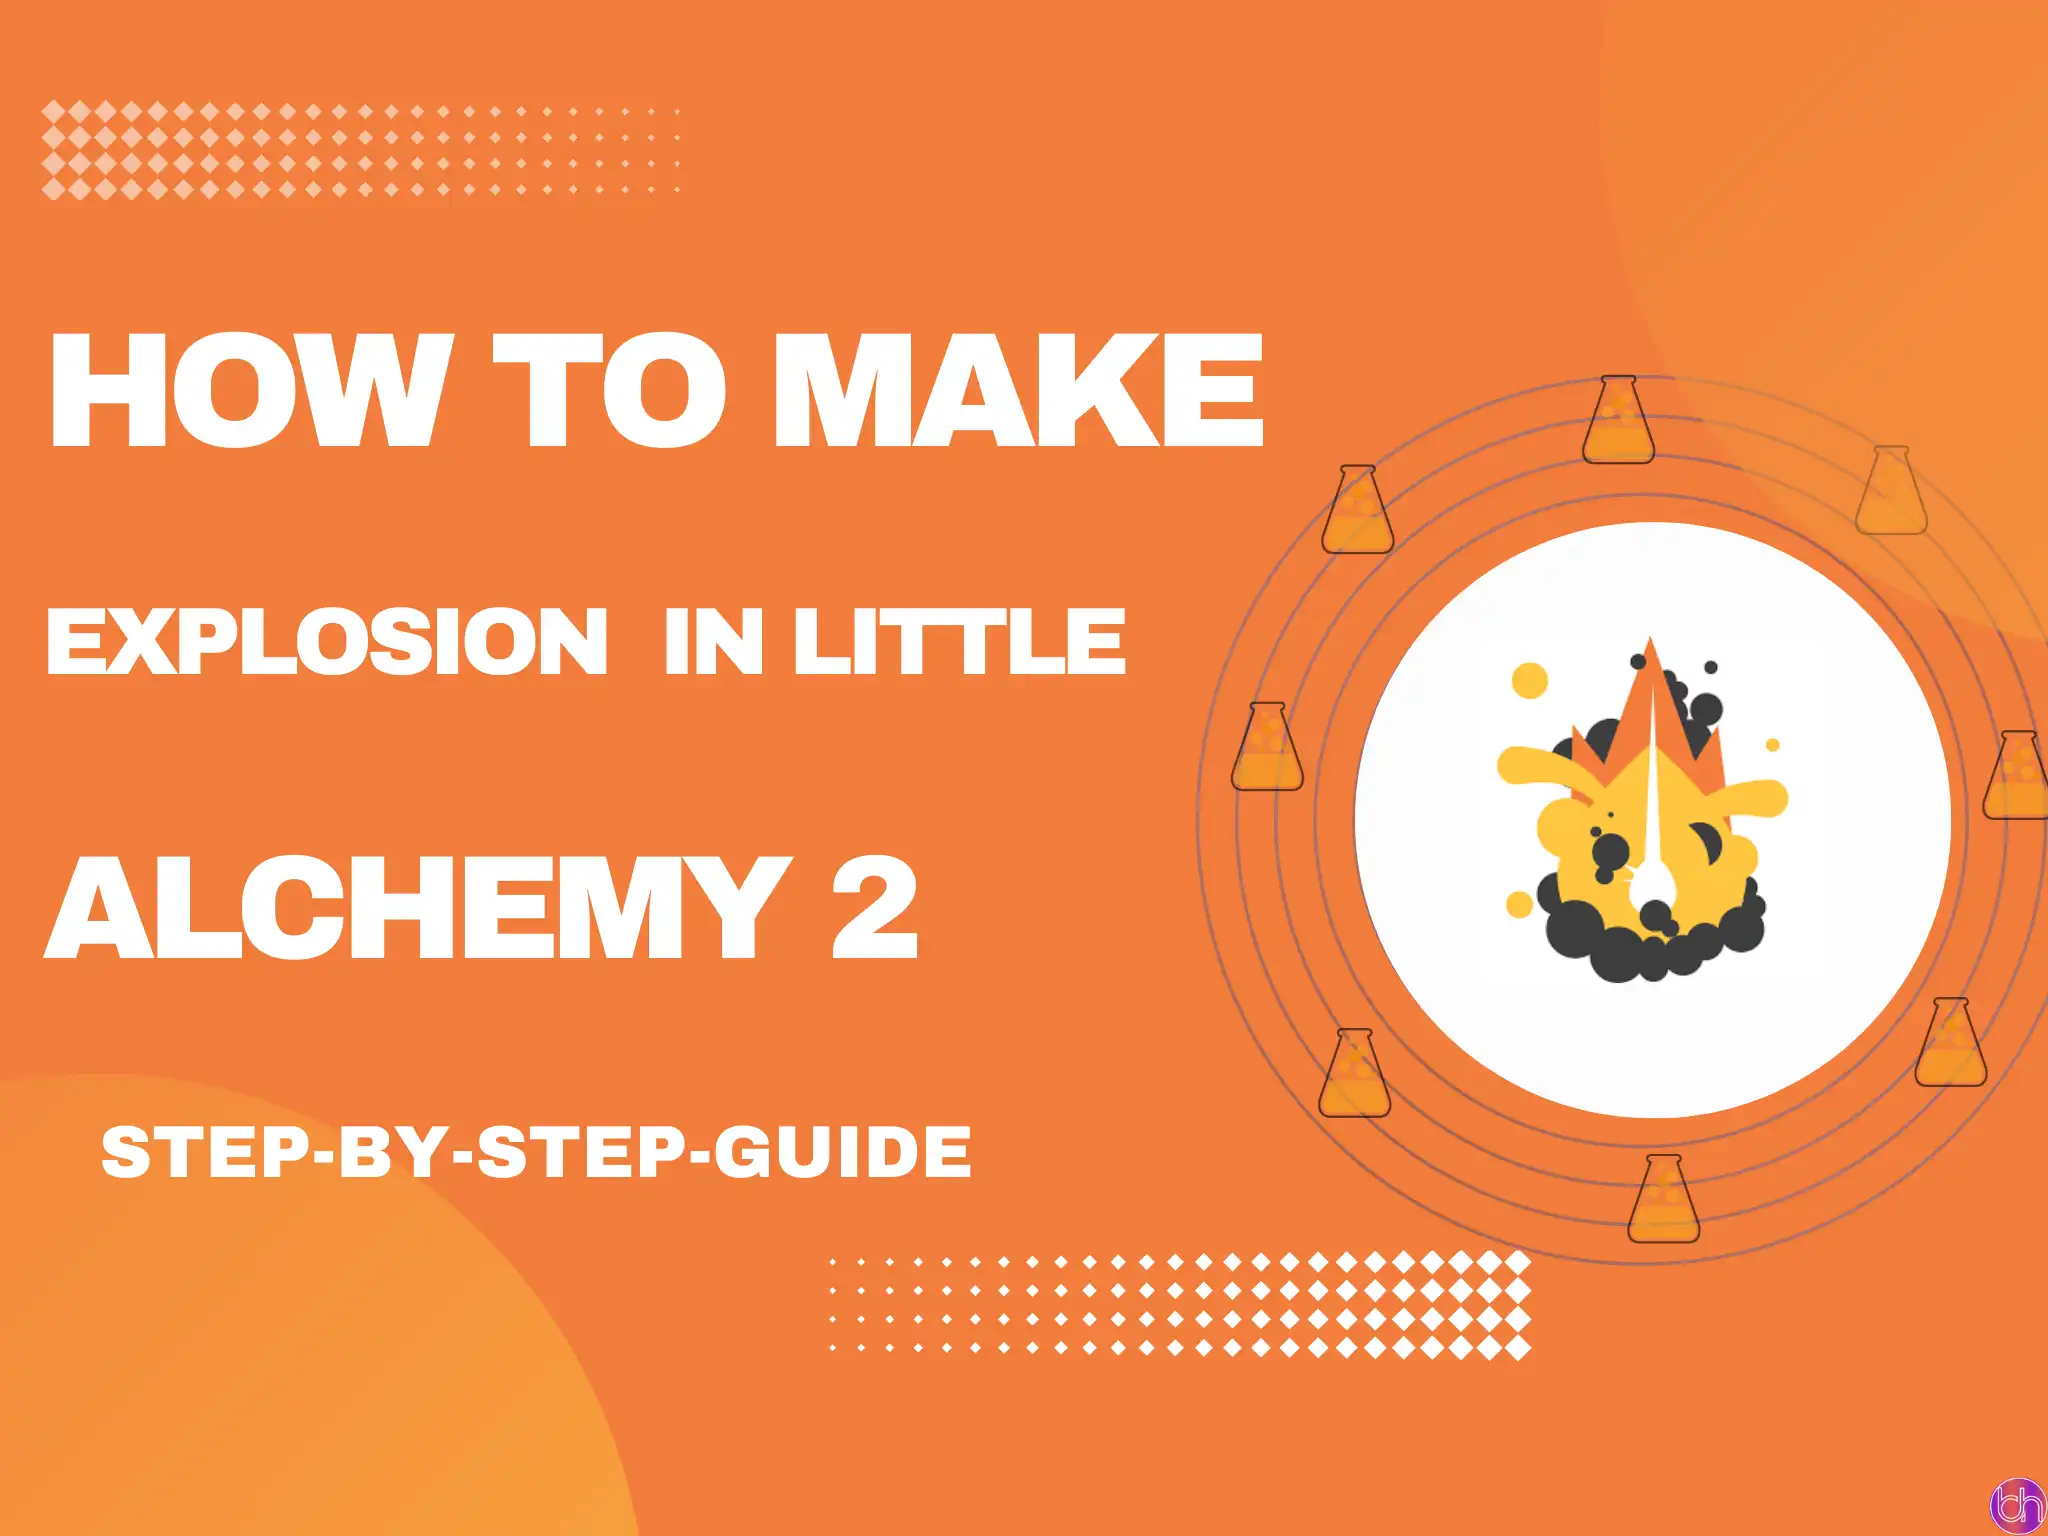 How to make Explosion in Little Alchemy 2